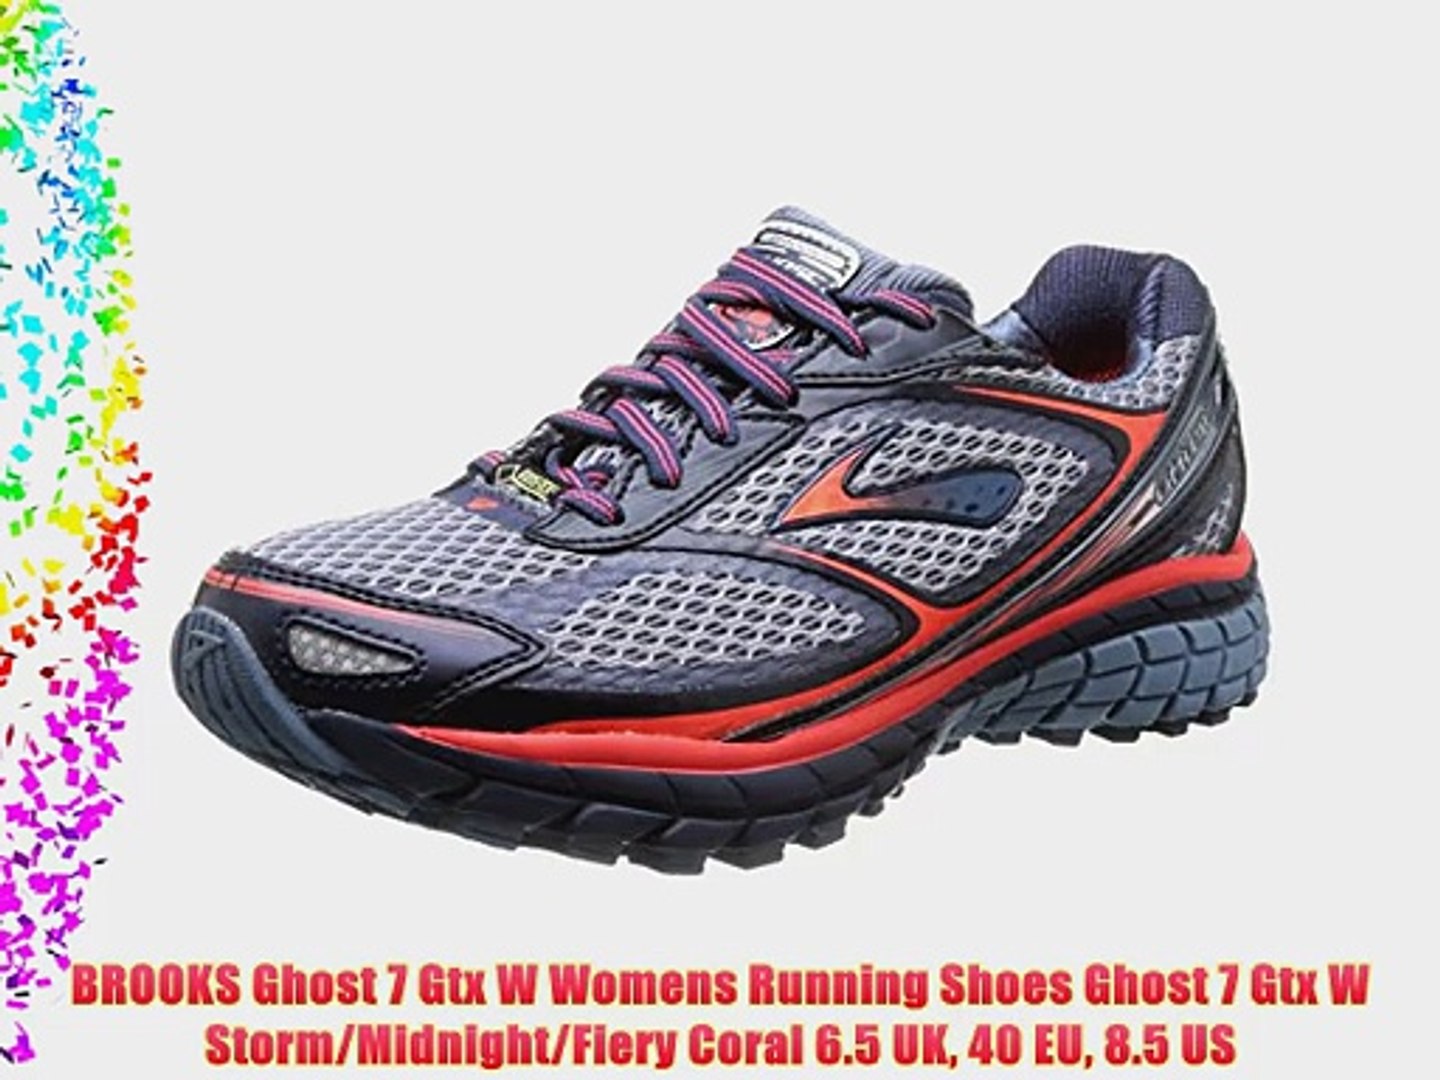 brooks ghost 7 or 8